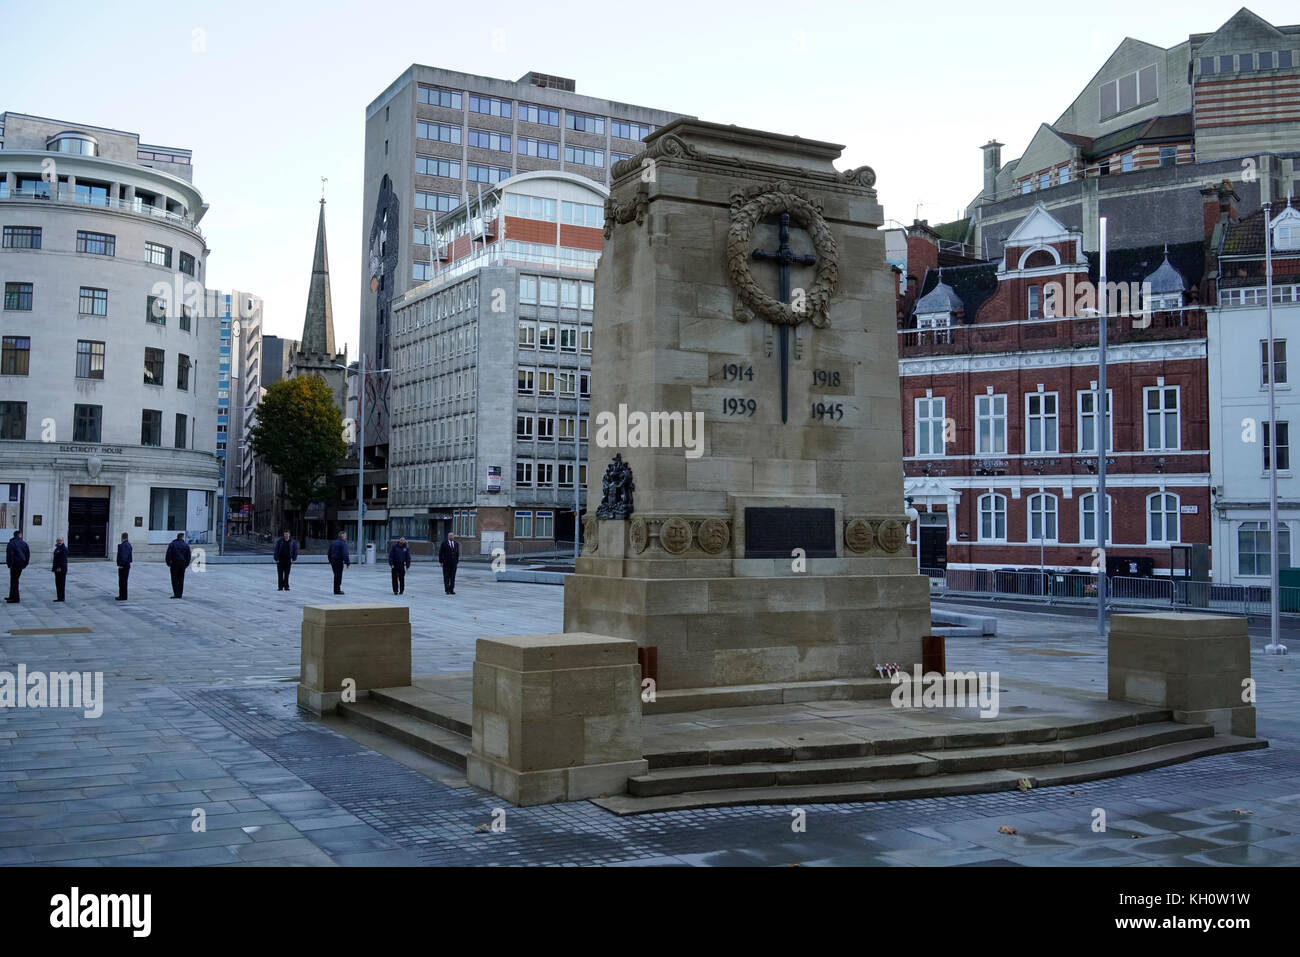 Bristol, United Kingdom, 12 November 2017.  Early morning preparations on a bright and brisk day at the newly refurbished Cenotaph in Bristol, ahead of the Remembrance Day service.  Credit: mfimage/Alamy Live News Stock Photo